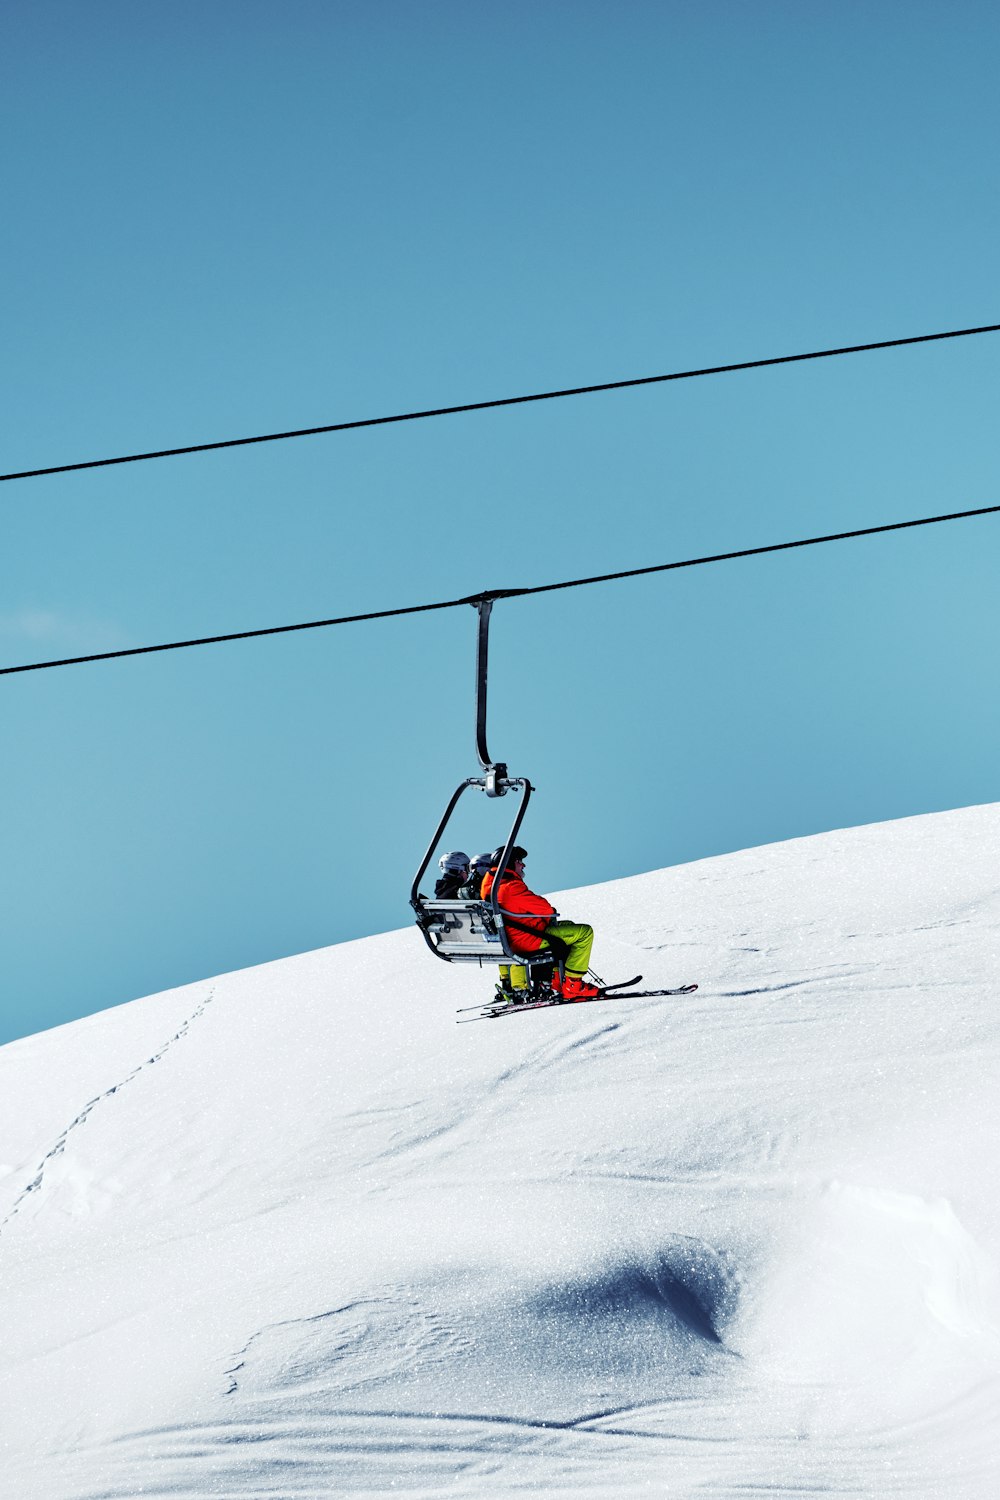 a person riding a ski lift down a snow covered slope